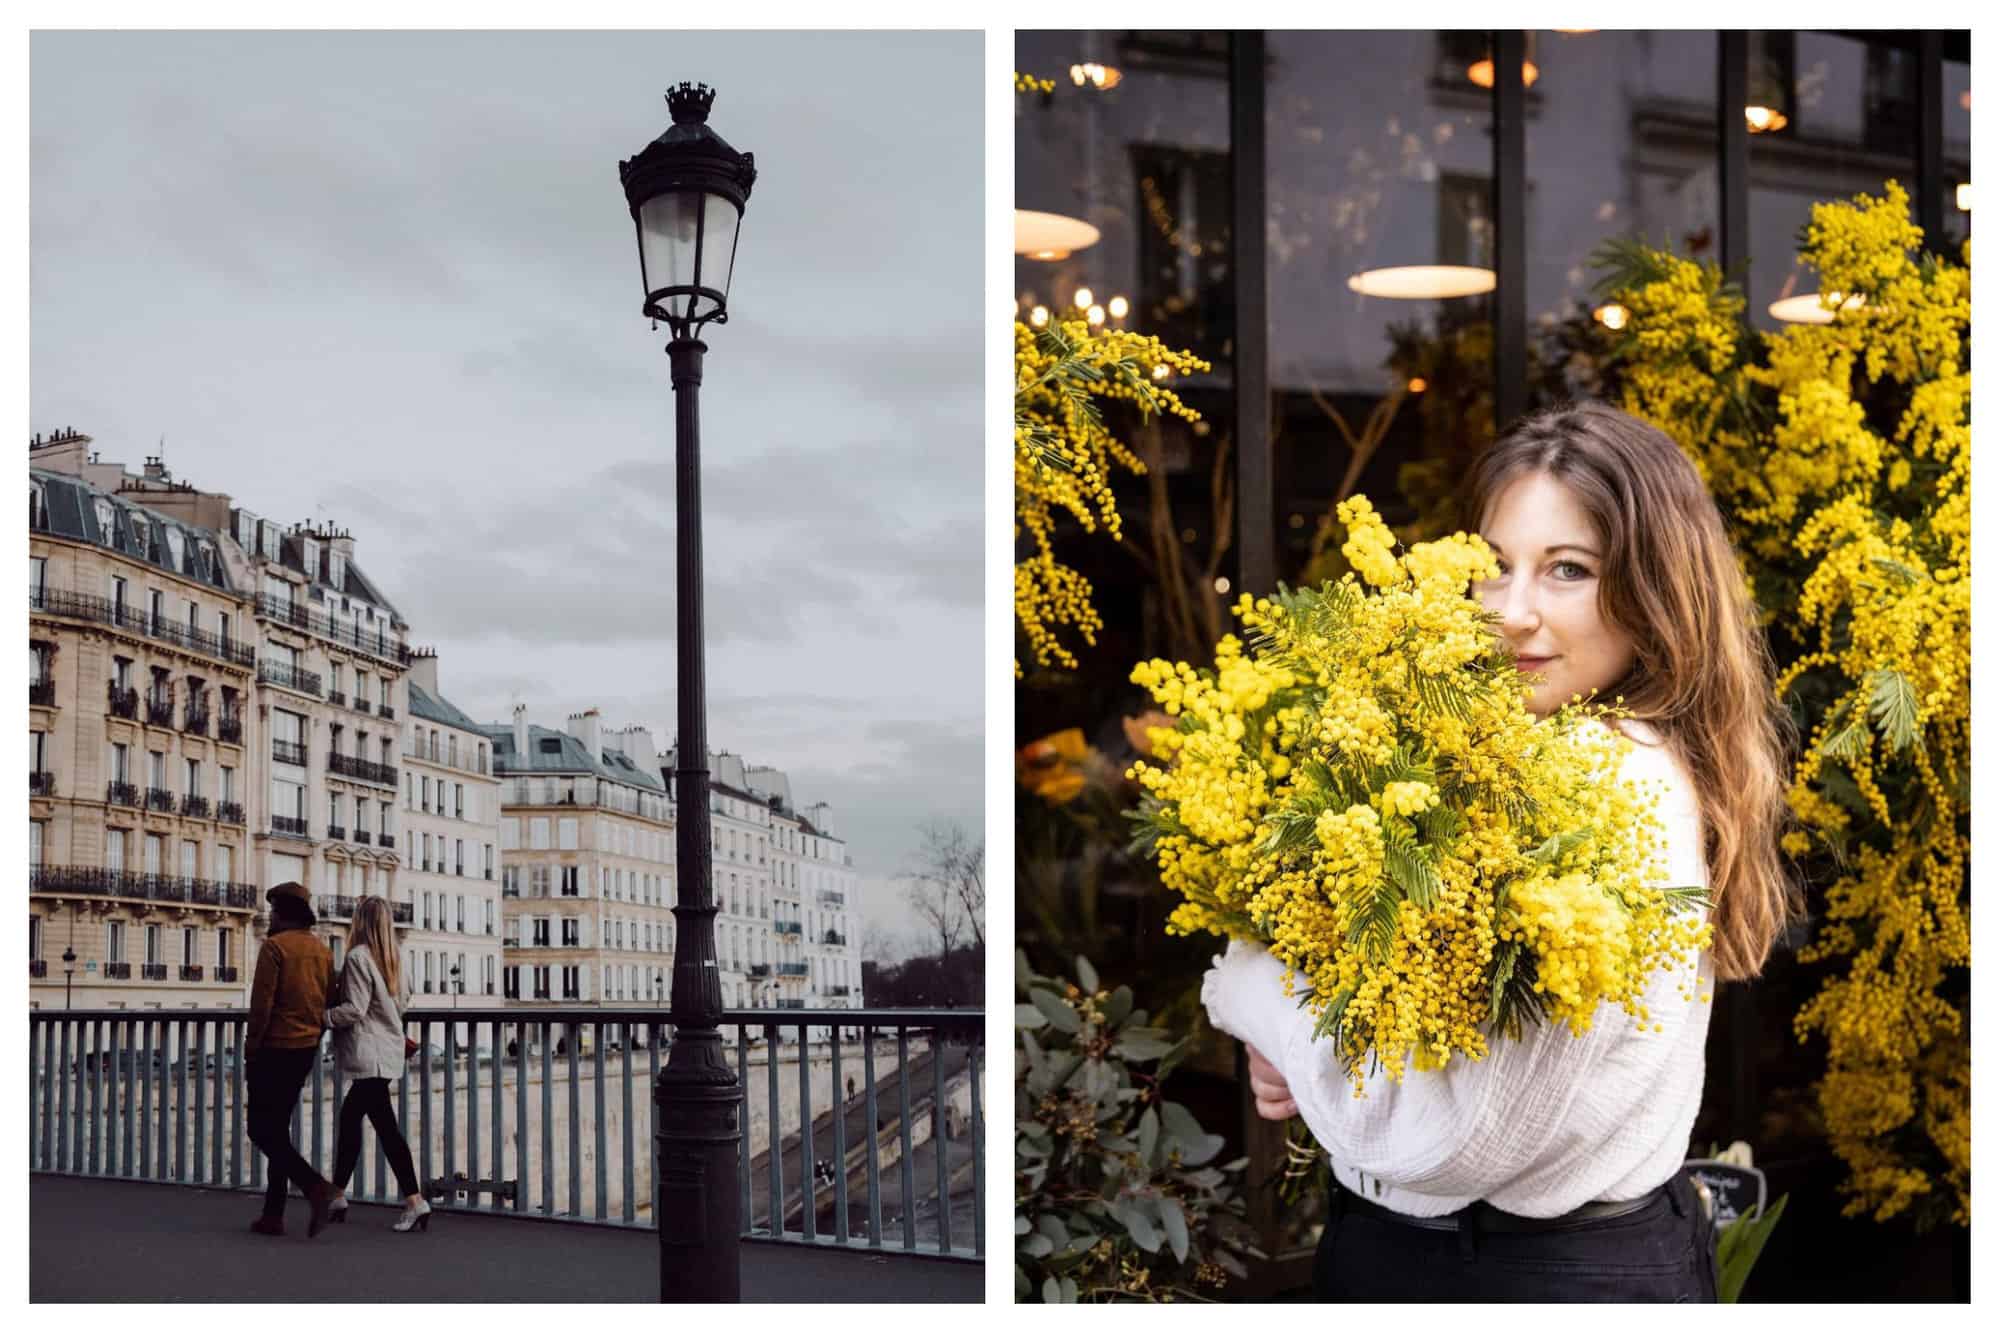 Left: a man and a woman walk arm in arm in the streets of Paris. 
Right: a woman holds a large bouquet of bright yellow flowers. 